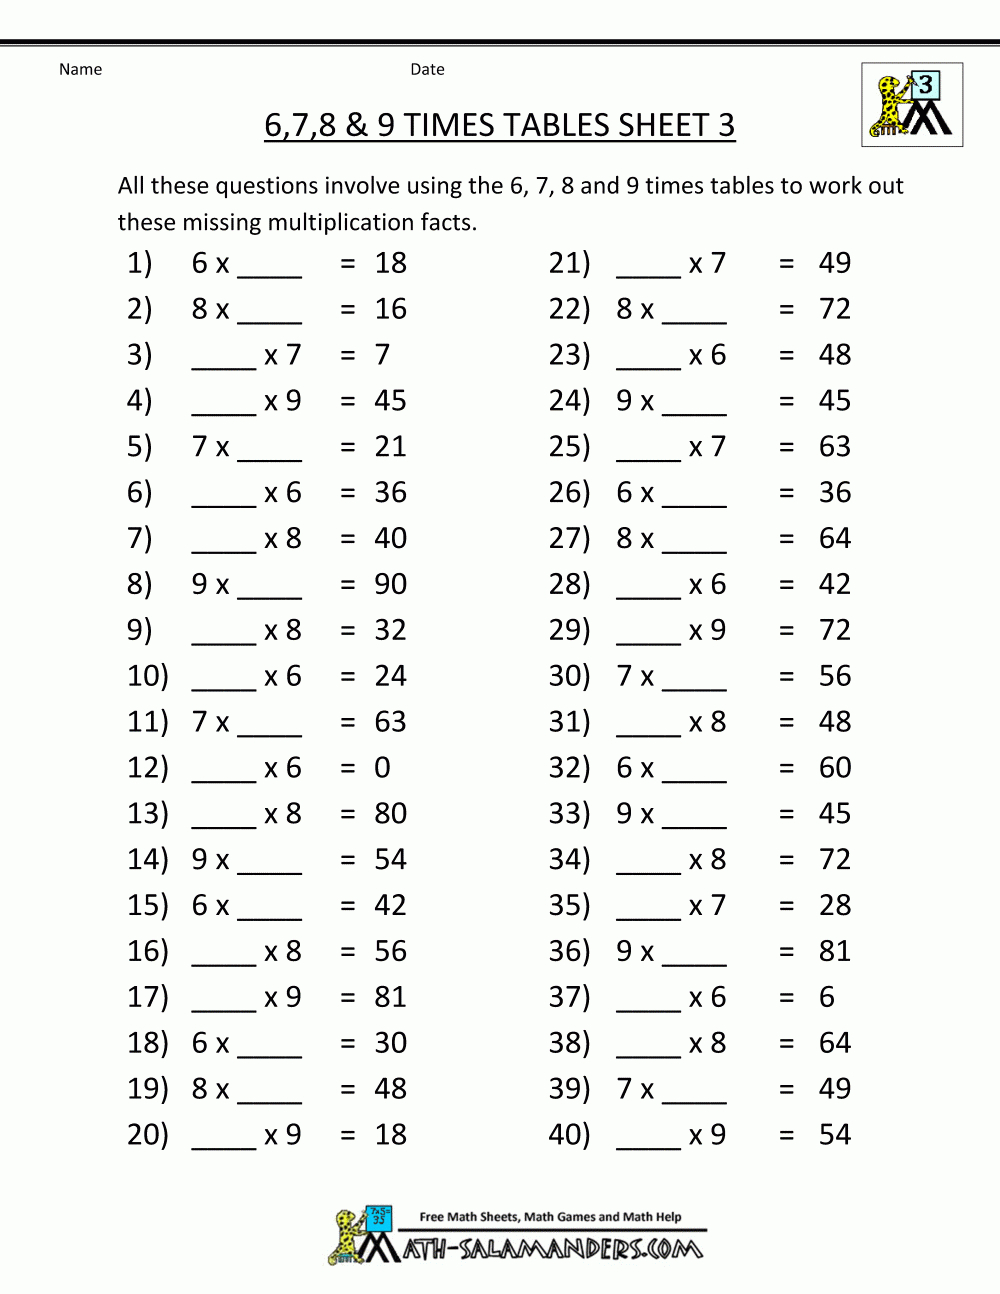 Free Multiplication Worksheets 6 7 8 9 Times Tables 3 with regard to Multiplication Worksheets 6 7 8